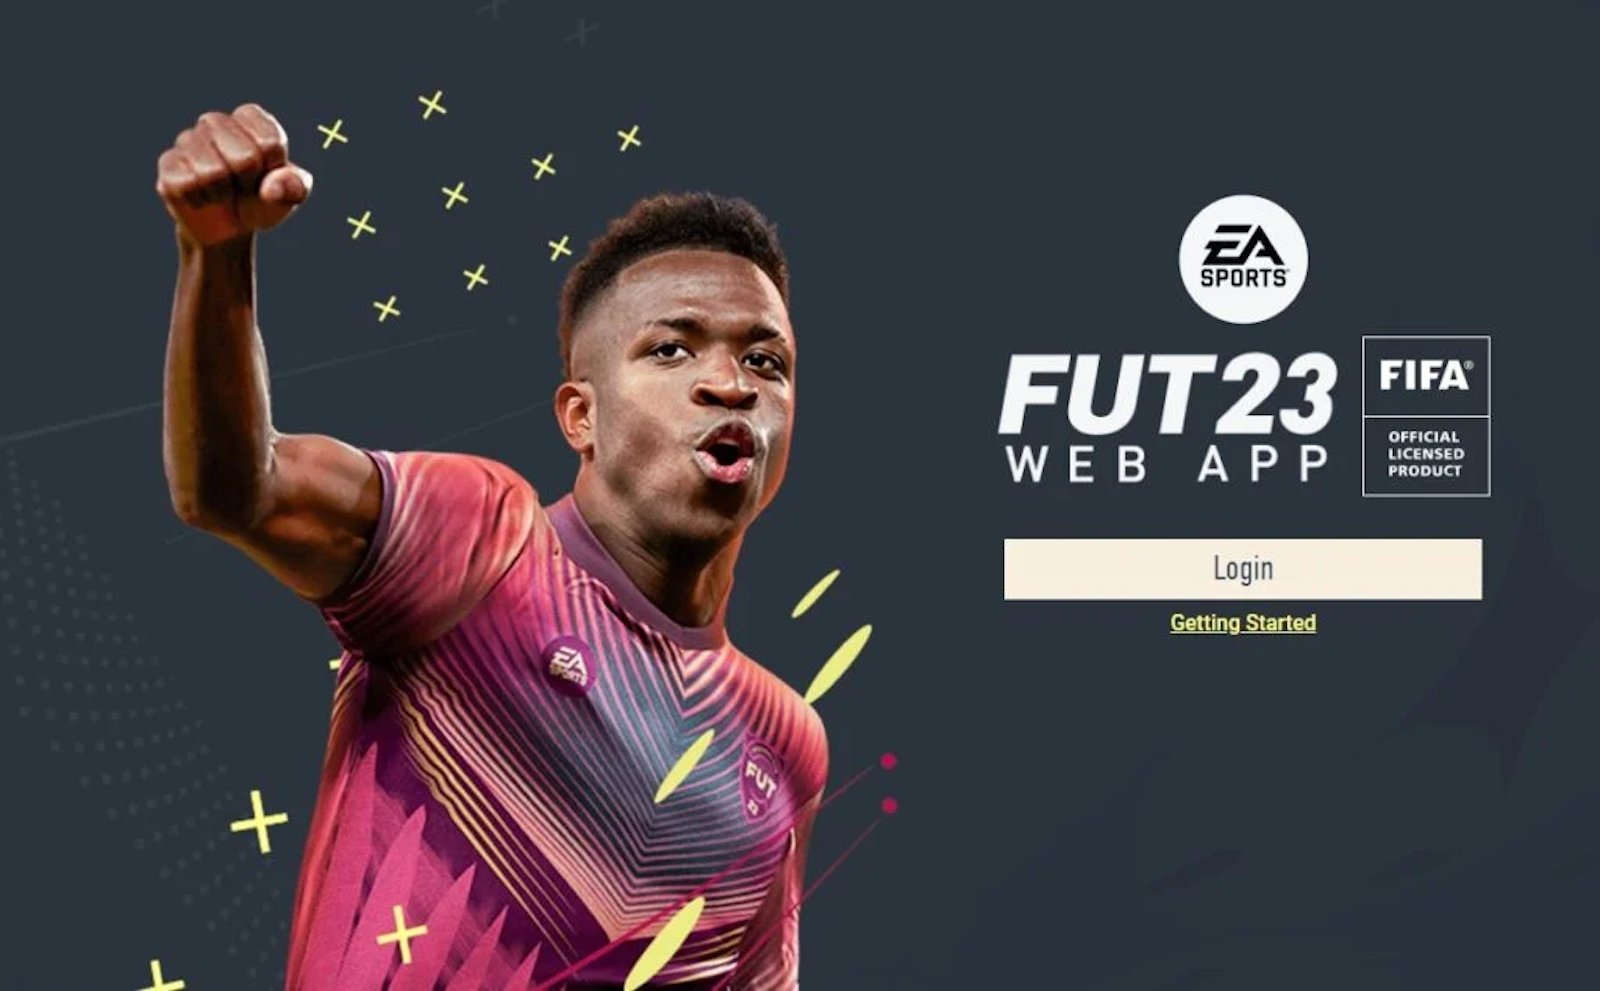 FIFA 23 web app is now live but its having some issues